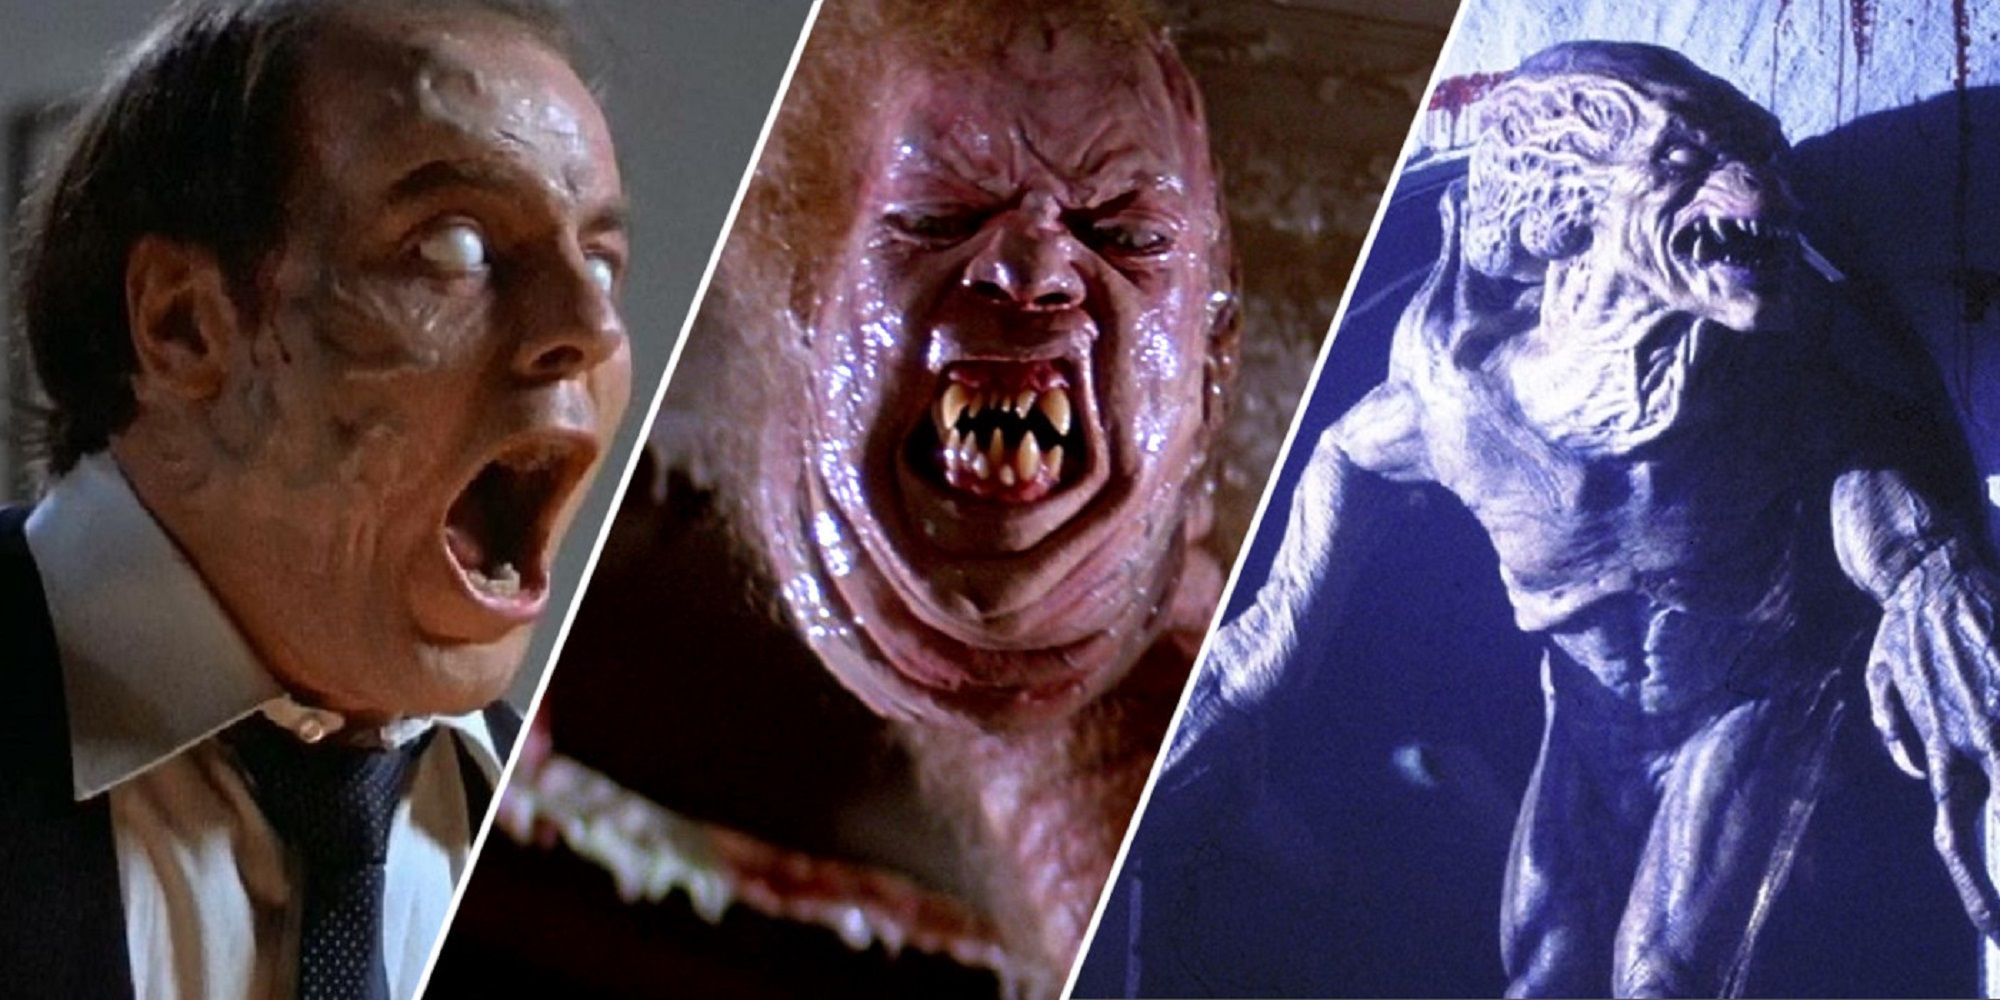 Telekinesis in 'Scanners,' the monster from 'The Thing,' and Pumpkinhead demon from 'Pumpkinhead.'